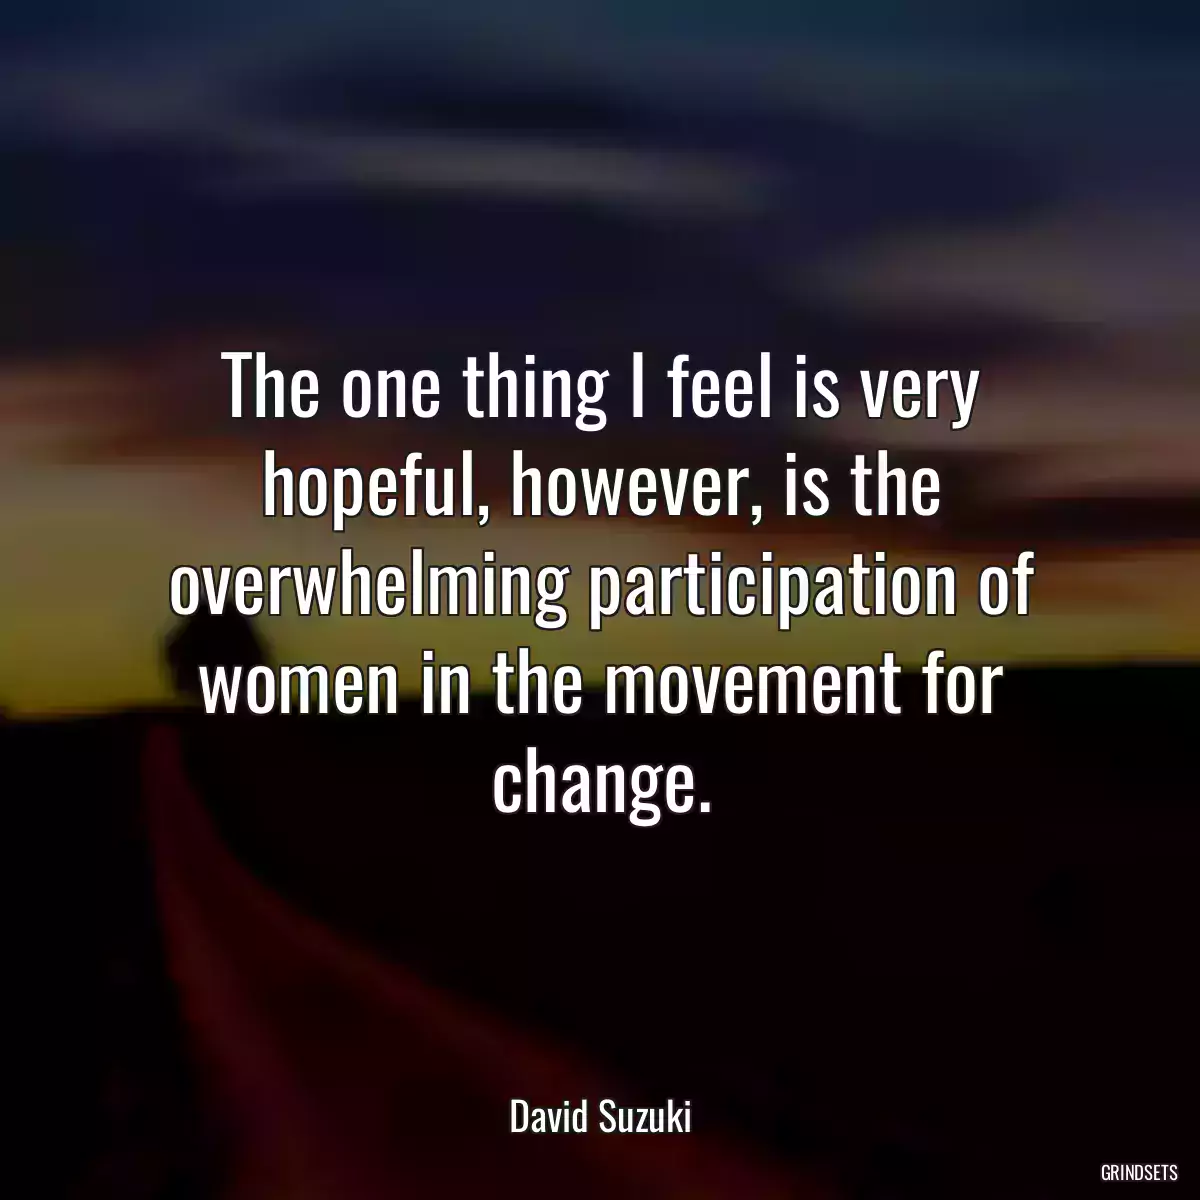 The one thing I feel is very hopeful, however, is the overwhelming participation of women in the movement for change.